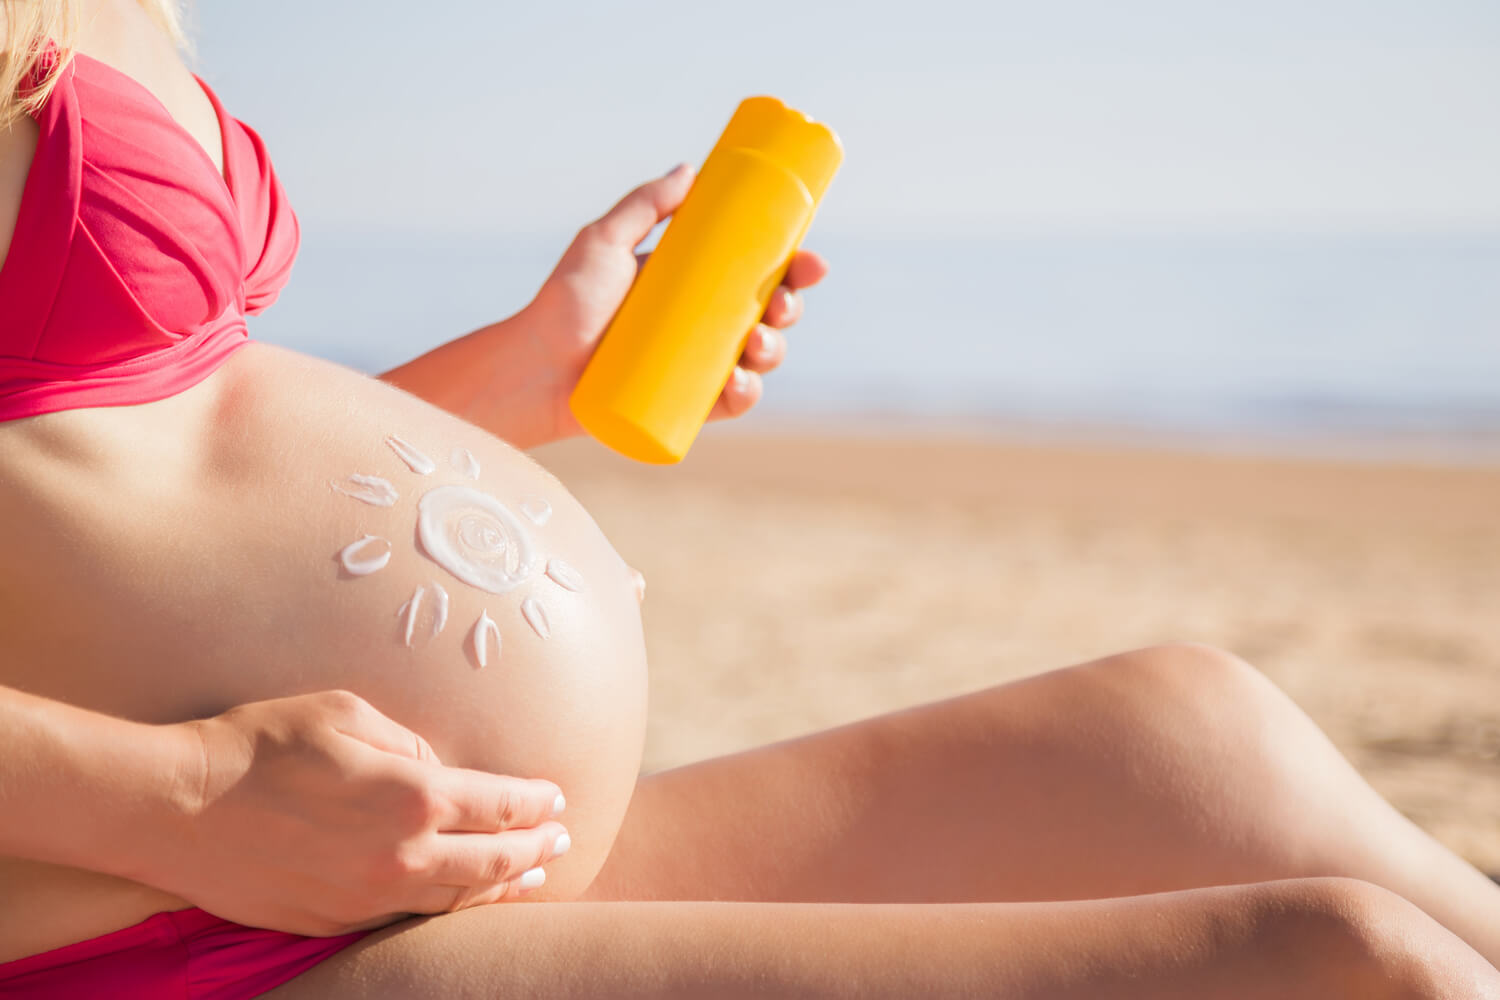 Protect With Sunscreen